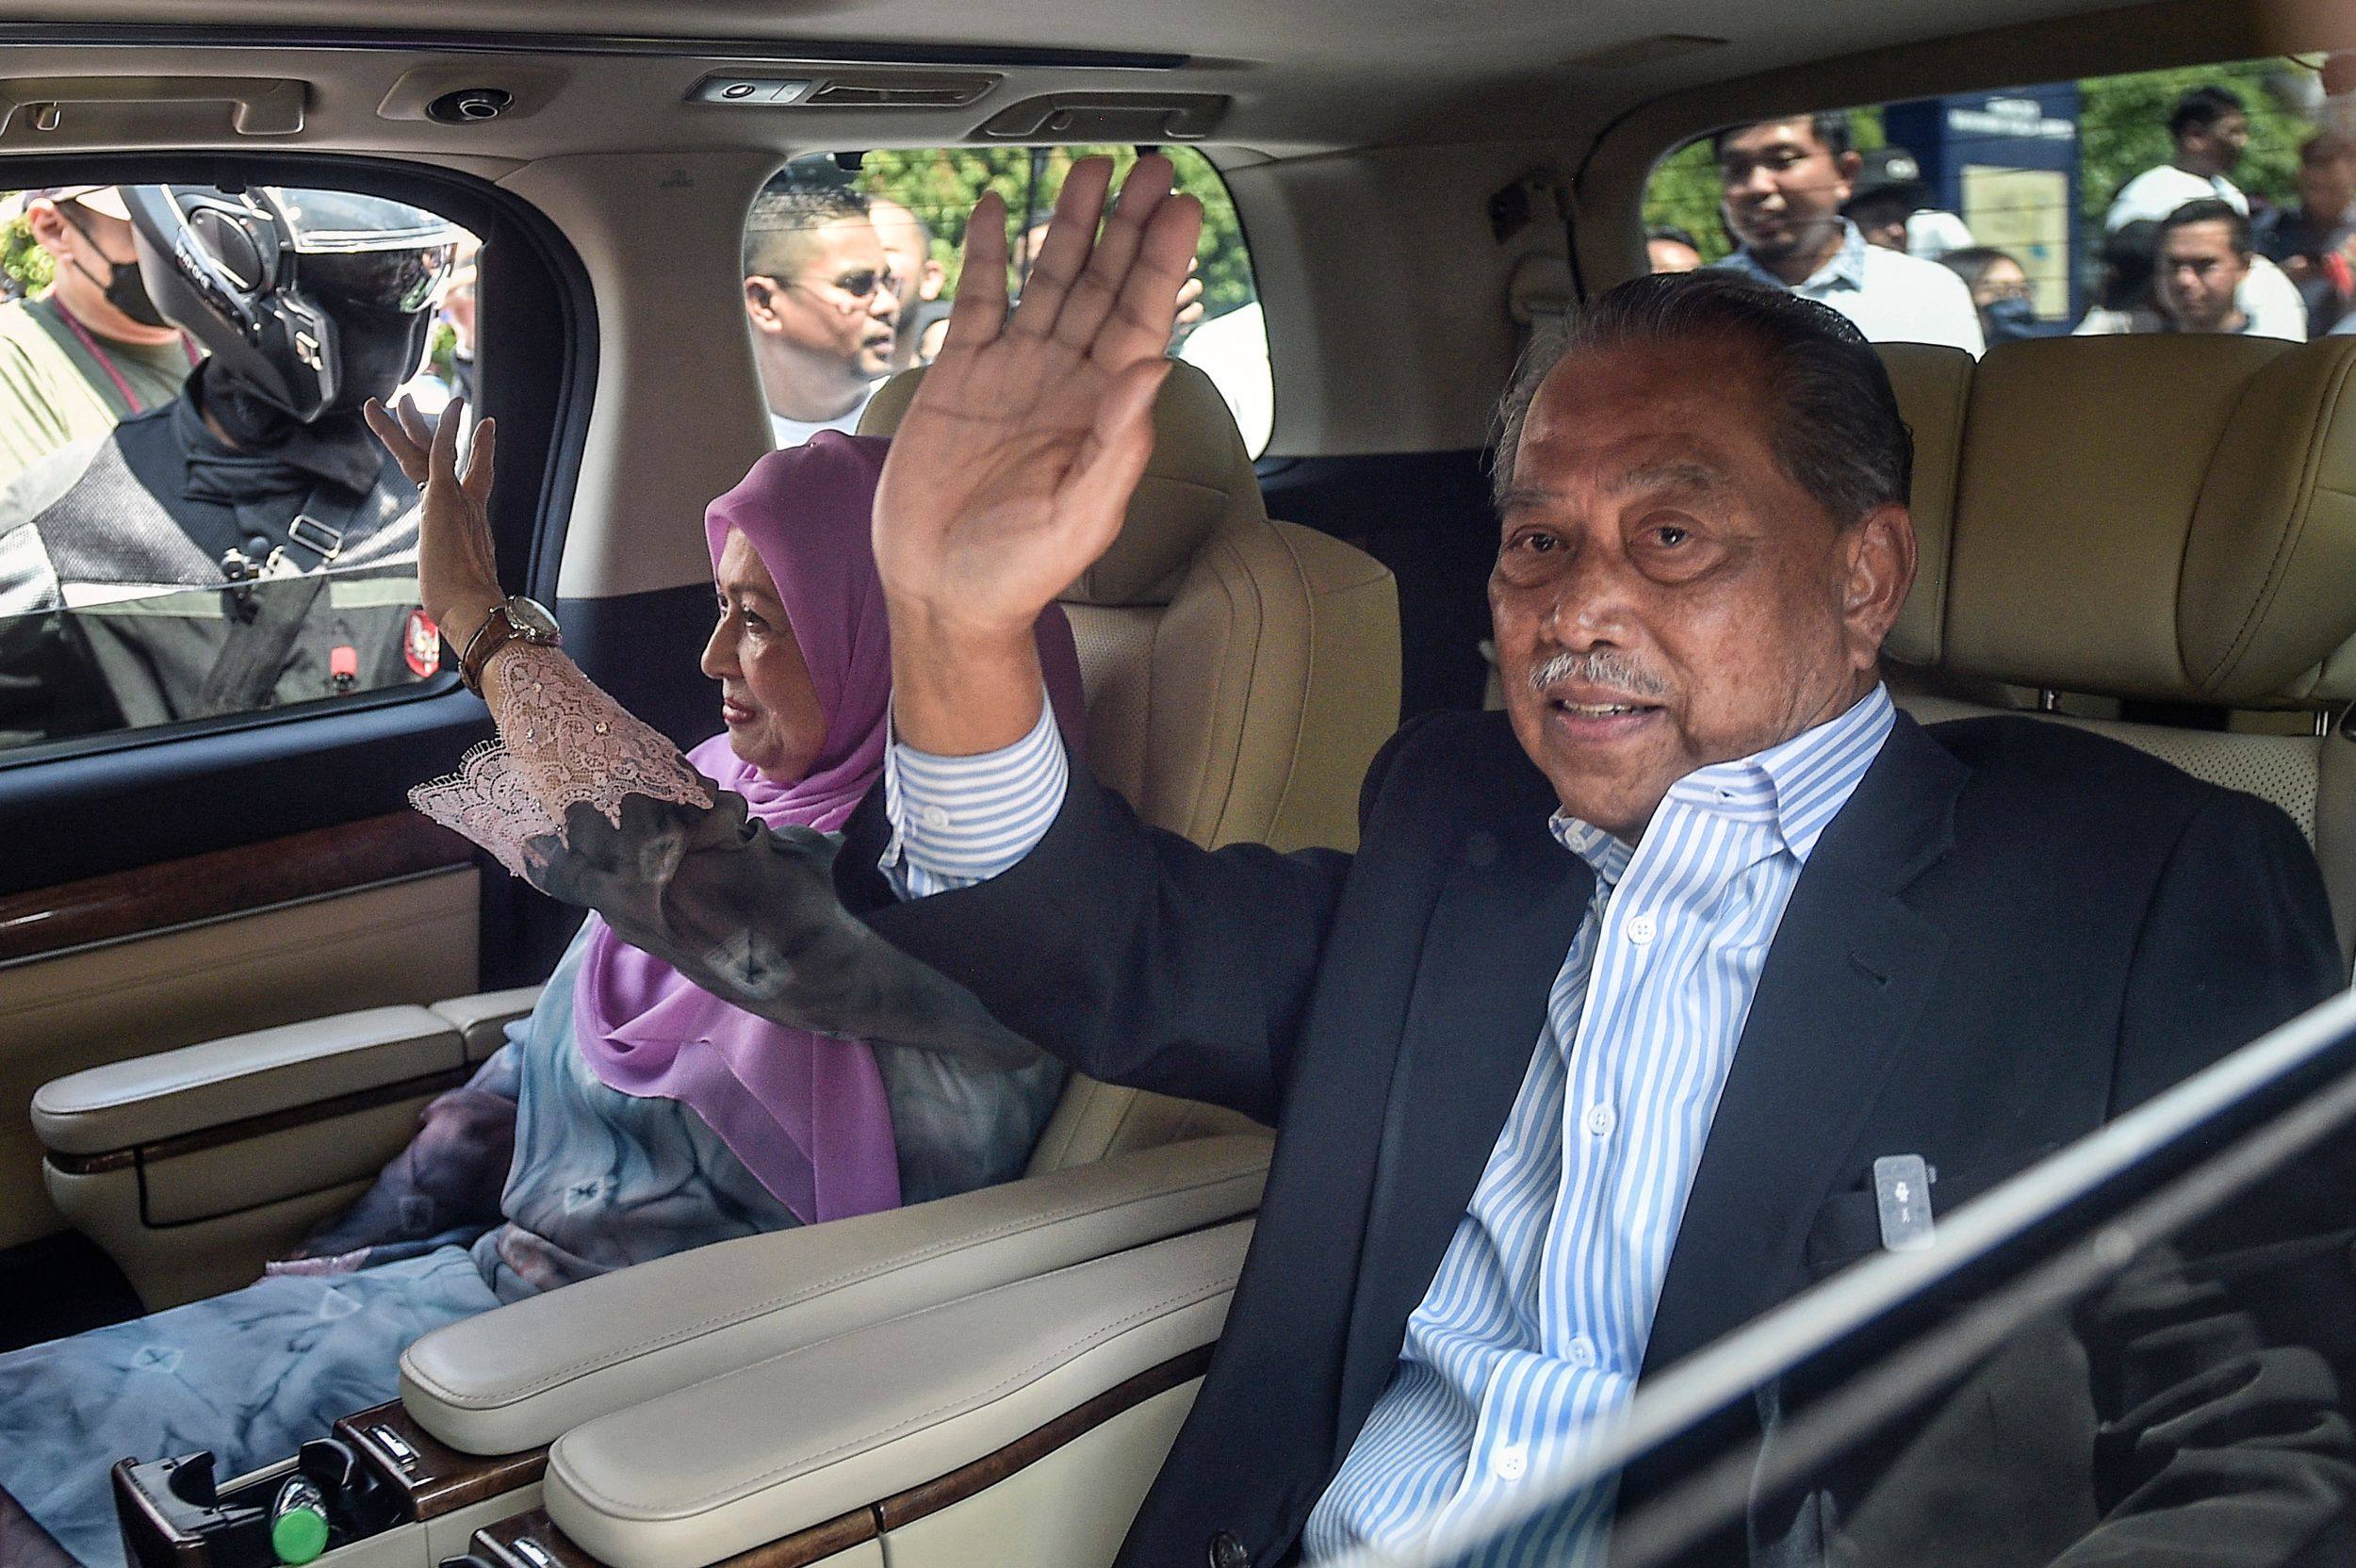 Former prime minister of Malaysia and Perikatan Nasional chairman Muhyiddin Yassin (right) waves as he leaves the Kuala Lumpur High Court after being charged with corruption in Kuala Lumpur on March 10. Photo: AFP